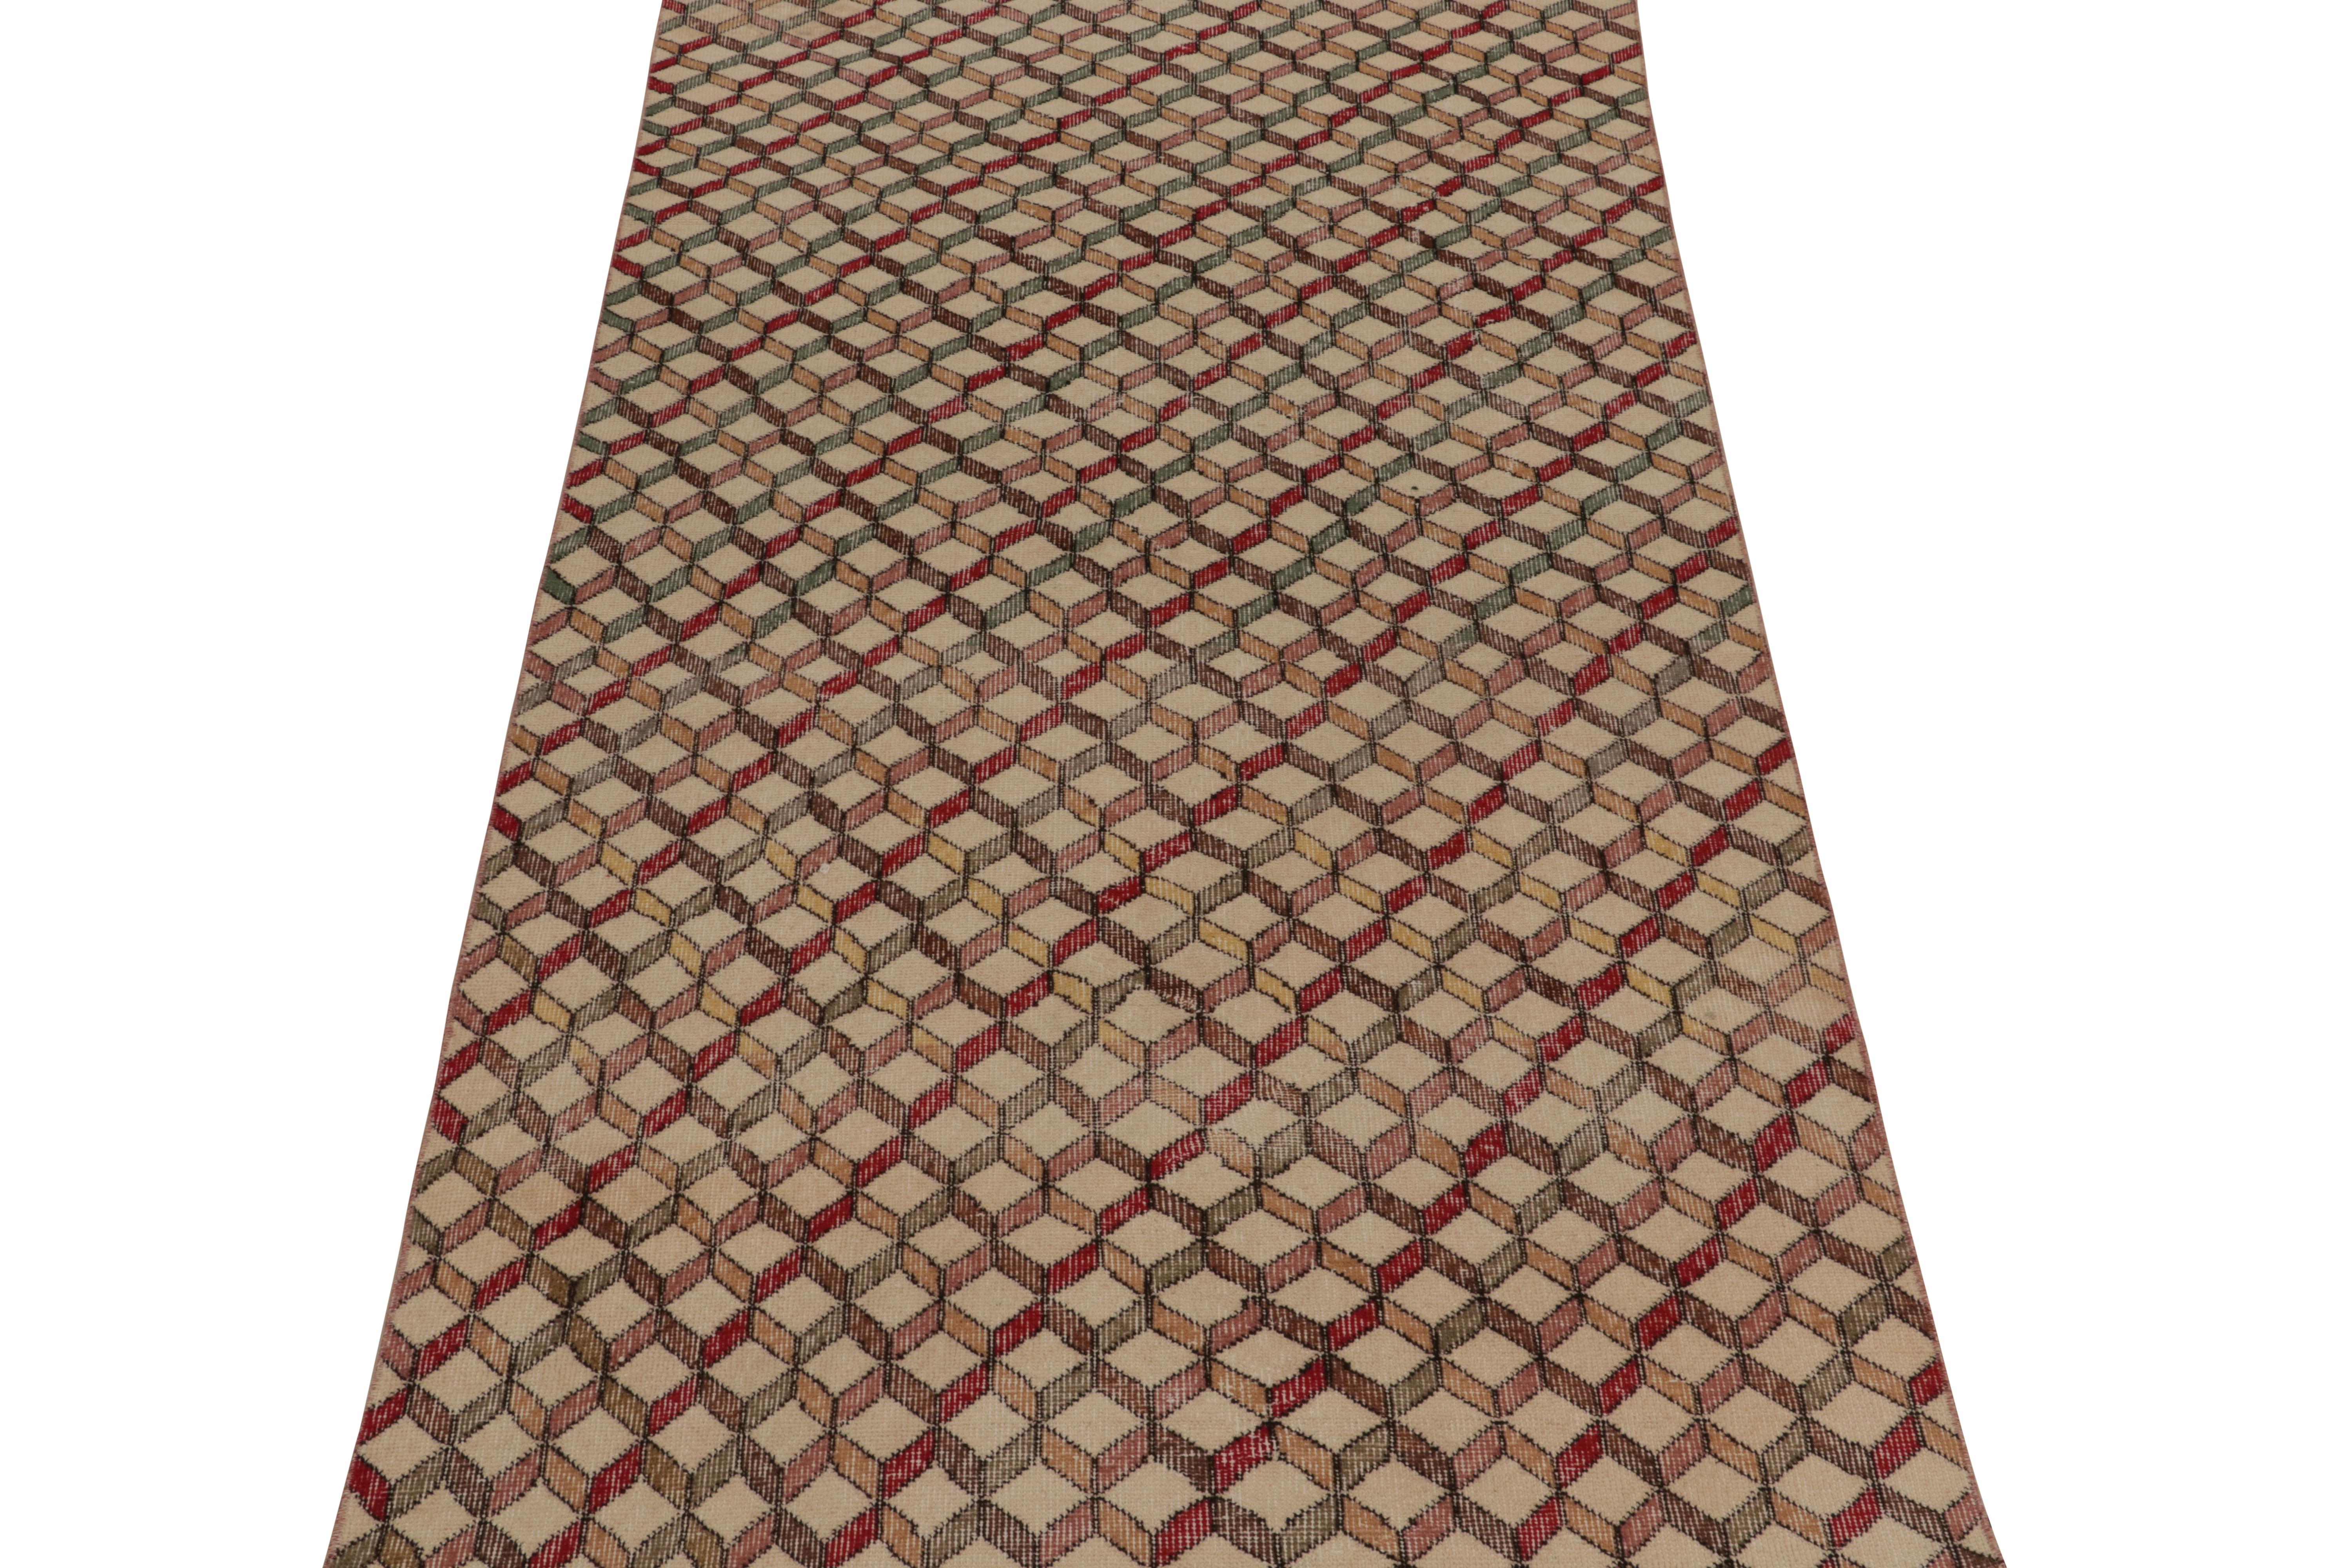 This vintage 2x7 runner is a new addition to Rug & Kilim’s commemorative Mid-Century Pasha Collection. This line is a commemoration of rare curations we believe to hail from mid-century Turkish designer Zeki Müren.

Further on the design:

This